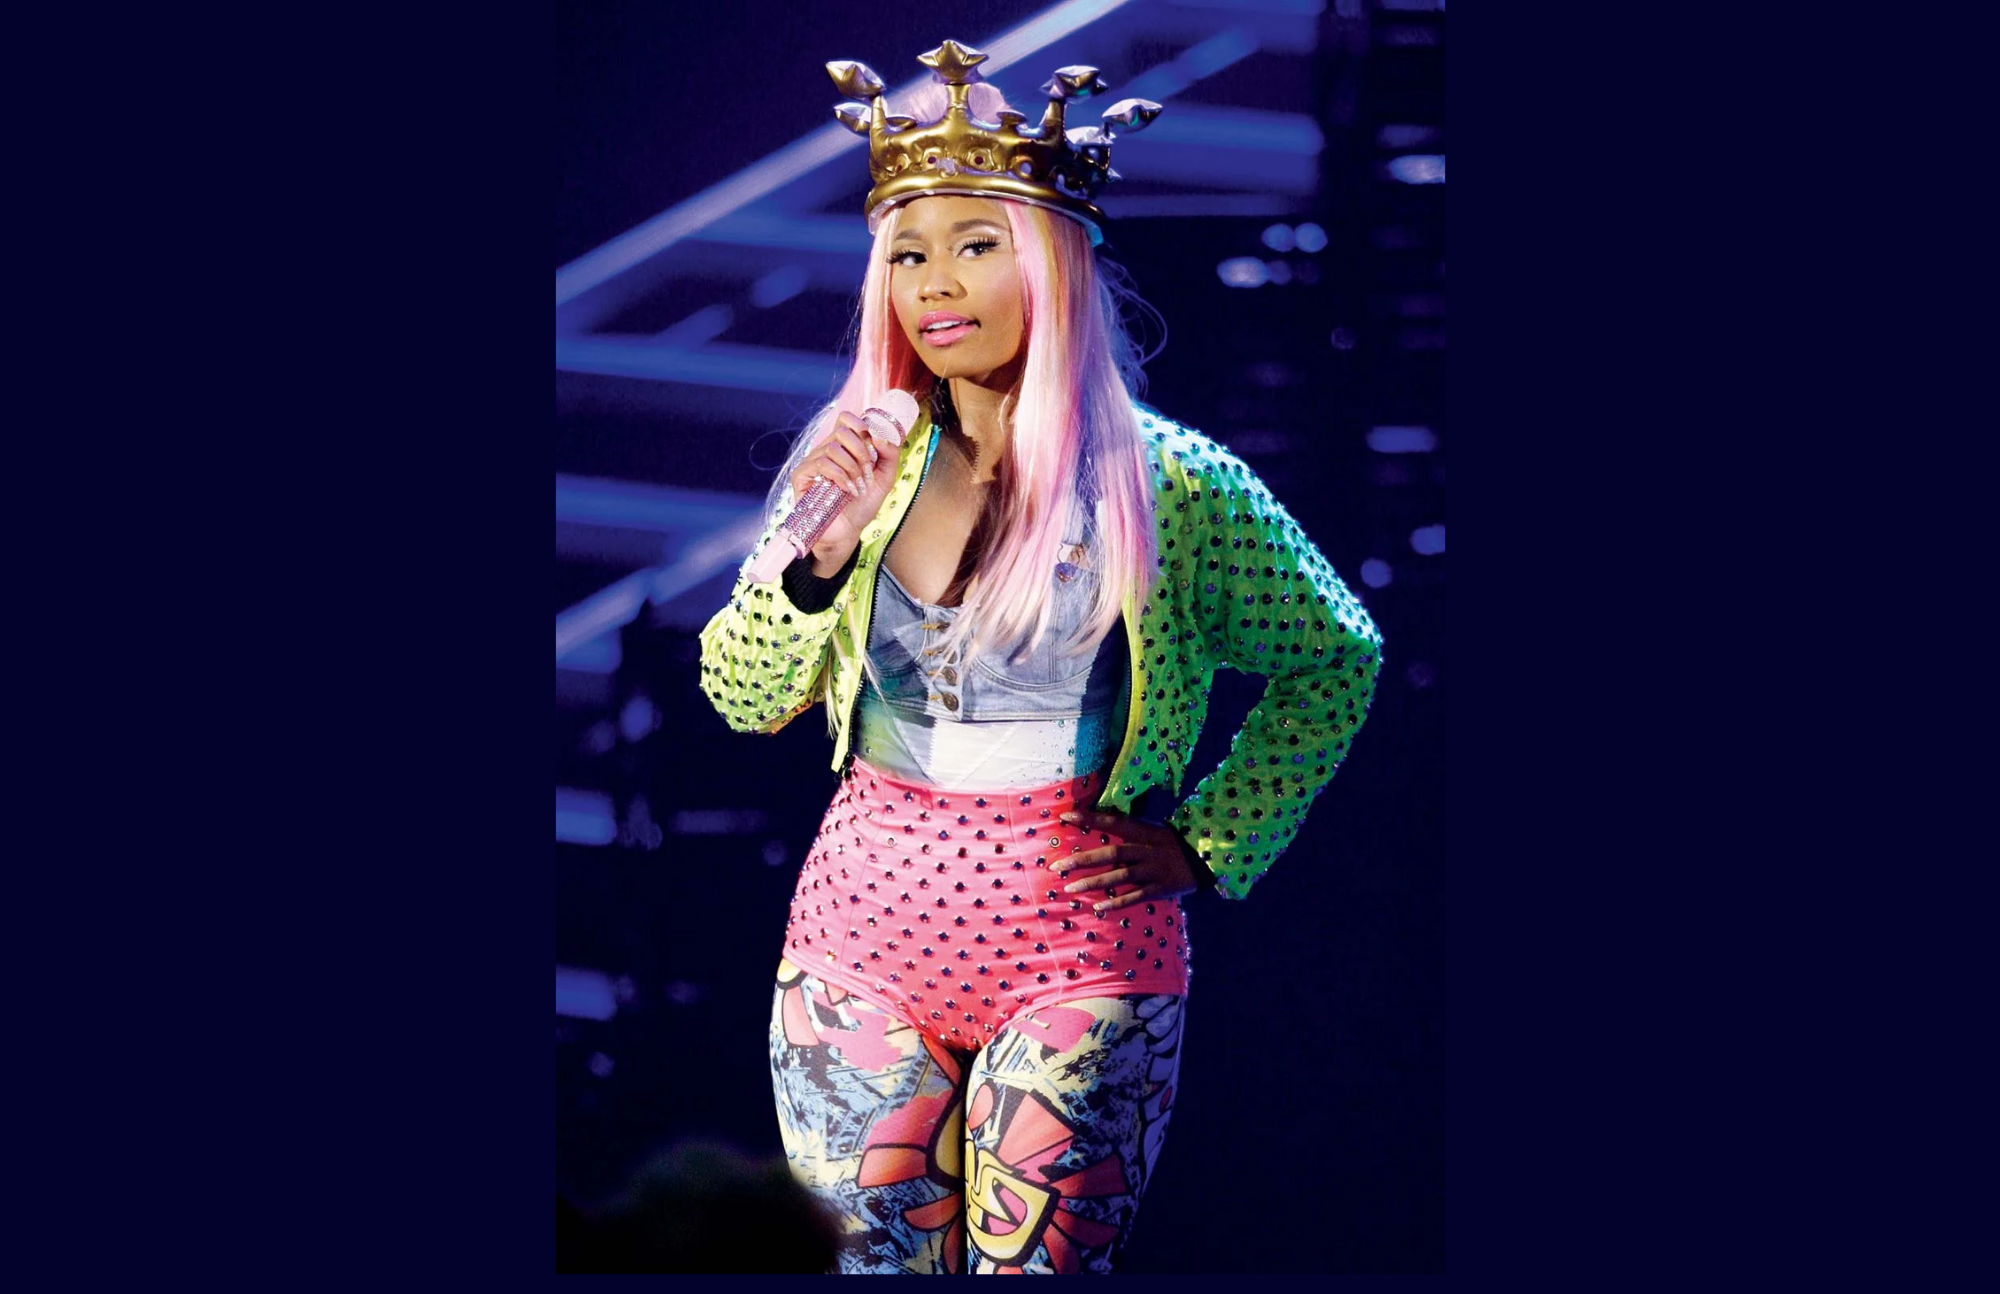 Nicki Minaj performs at a concert while wearing a crown, placing her hands on her waist, and holding a microphone